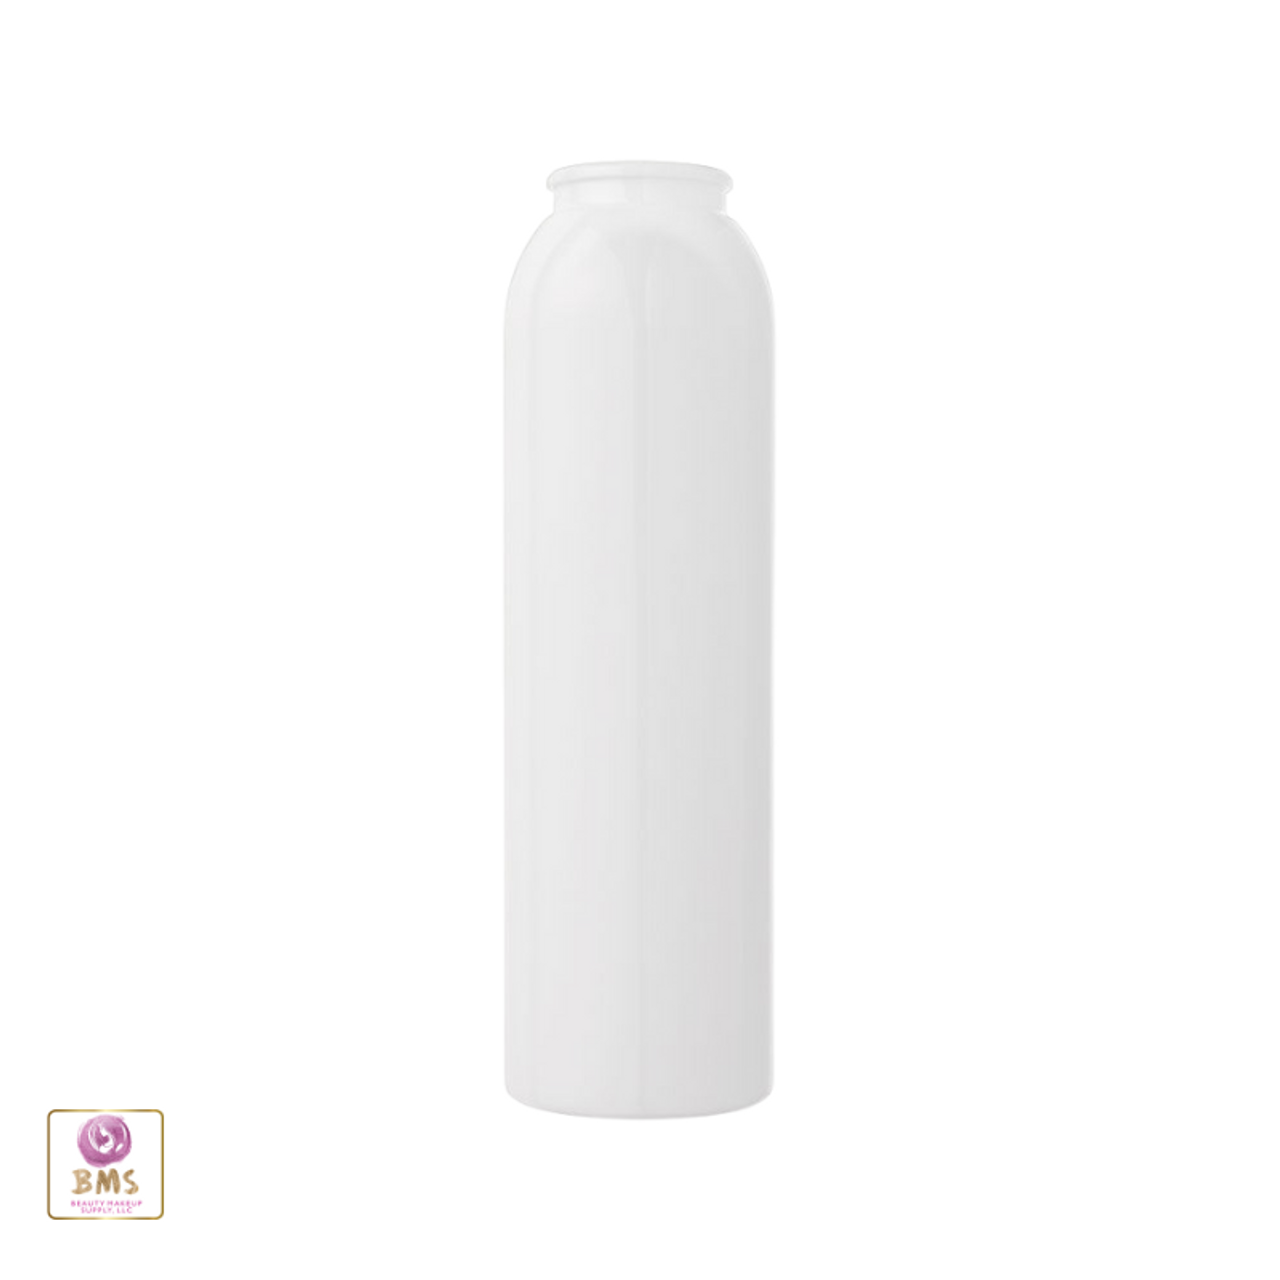 https://cdn11.bigcommerce.com/s-qd7k5gxi/images/stencil/1280x1280/products/604/7478/non_aerosol_bottle_and_pump_9795b_ig_beauty_makeup_supply__98263.1665021744.png?c=2?imbypass=on